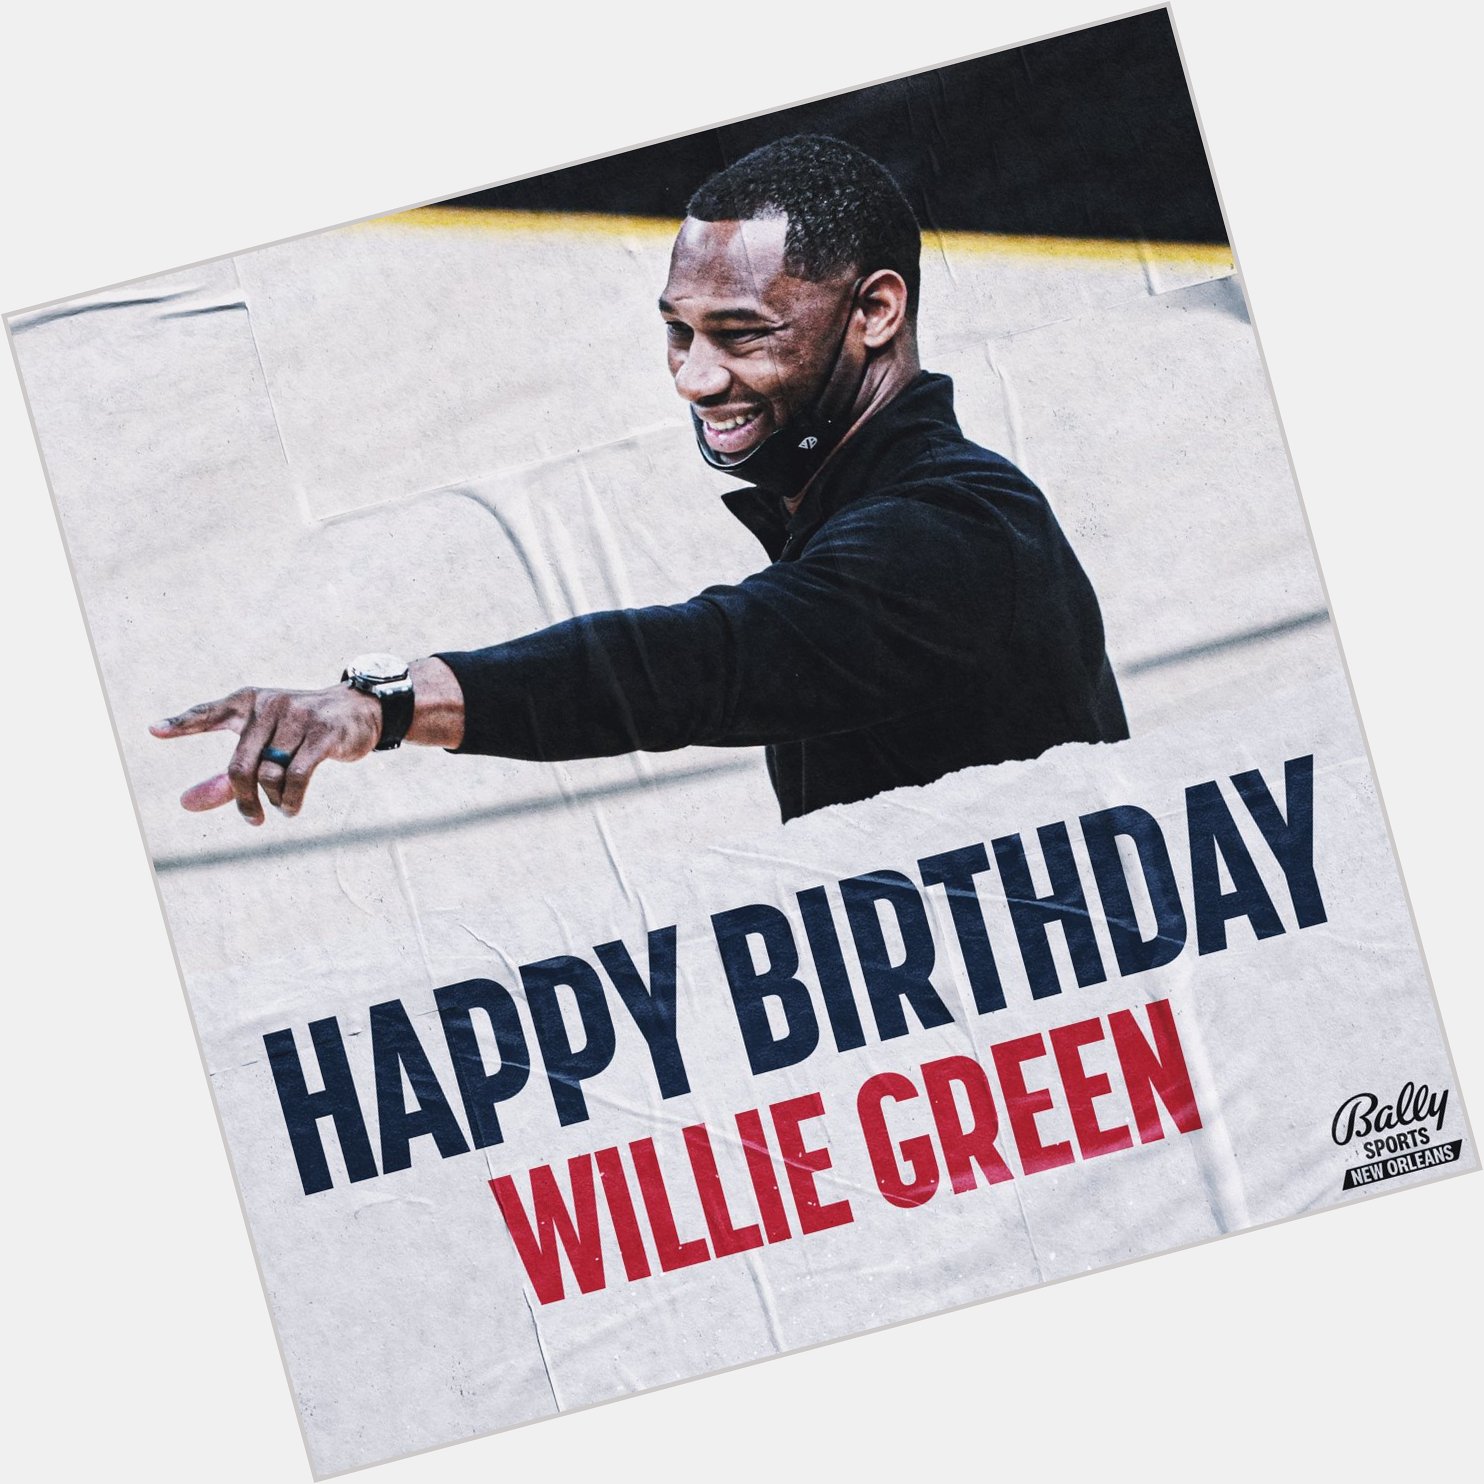 Join us in wishing a happy birthday to Coach Willie Green!  | 